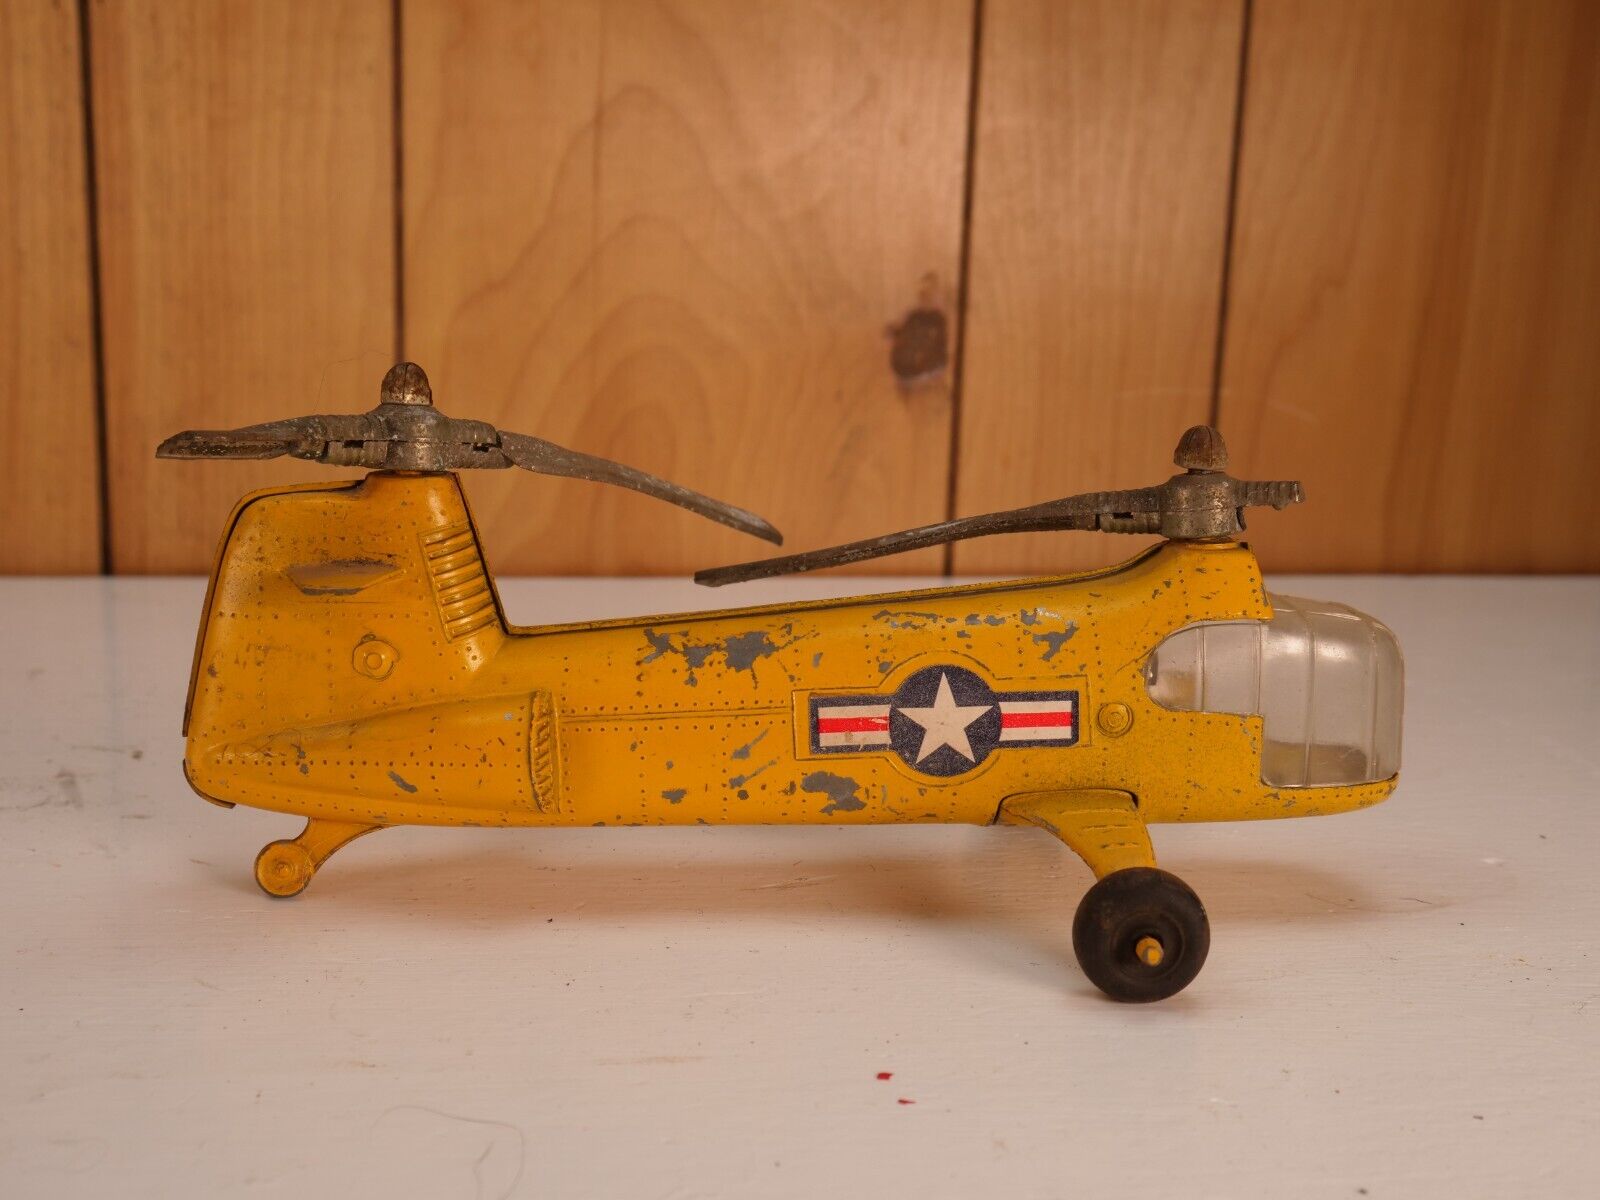 Hubley Kiddie Toy Yellow Military Helicopter